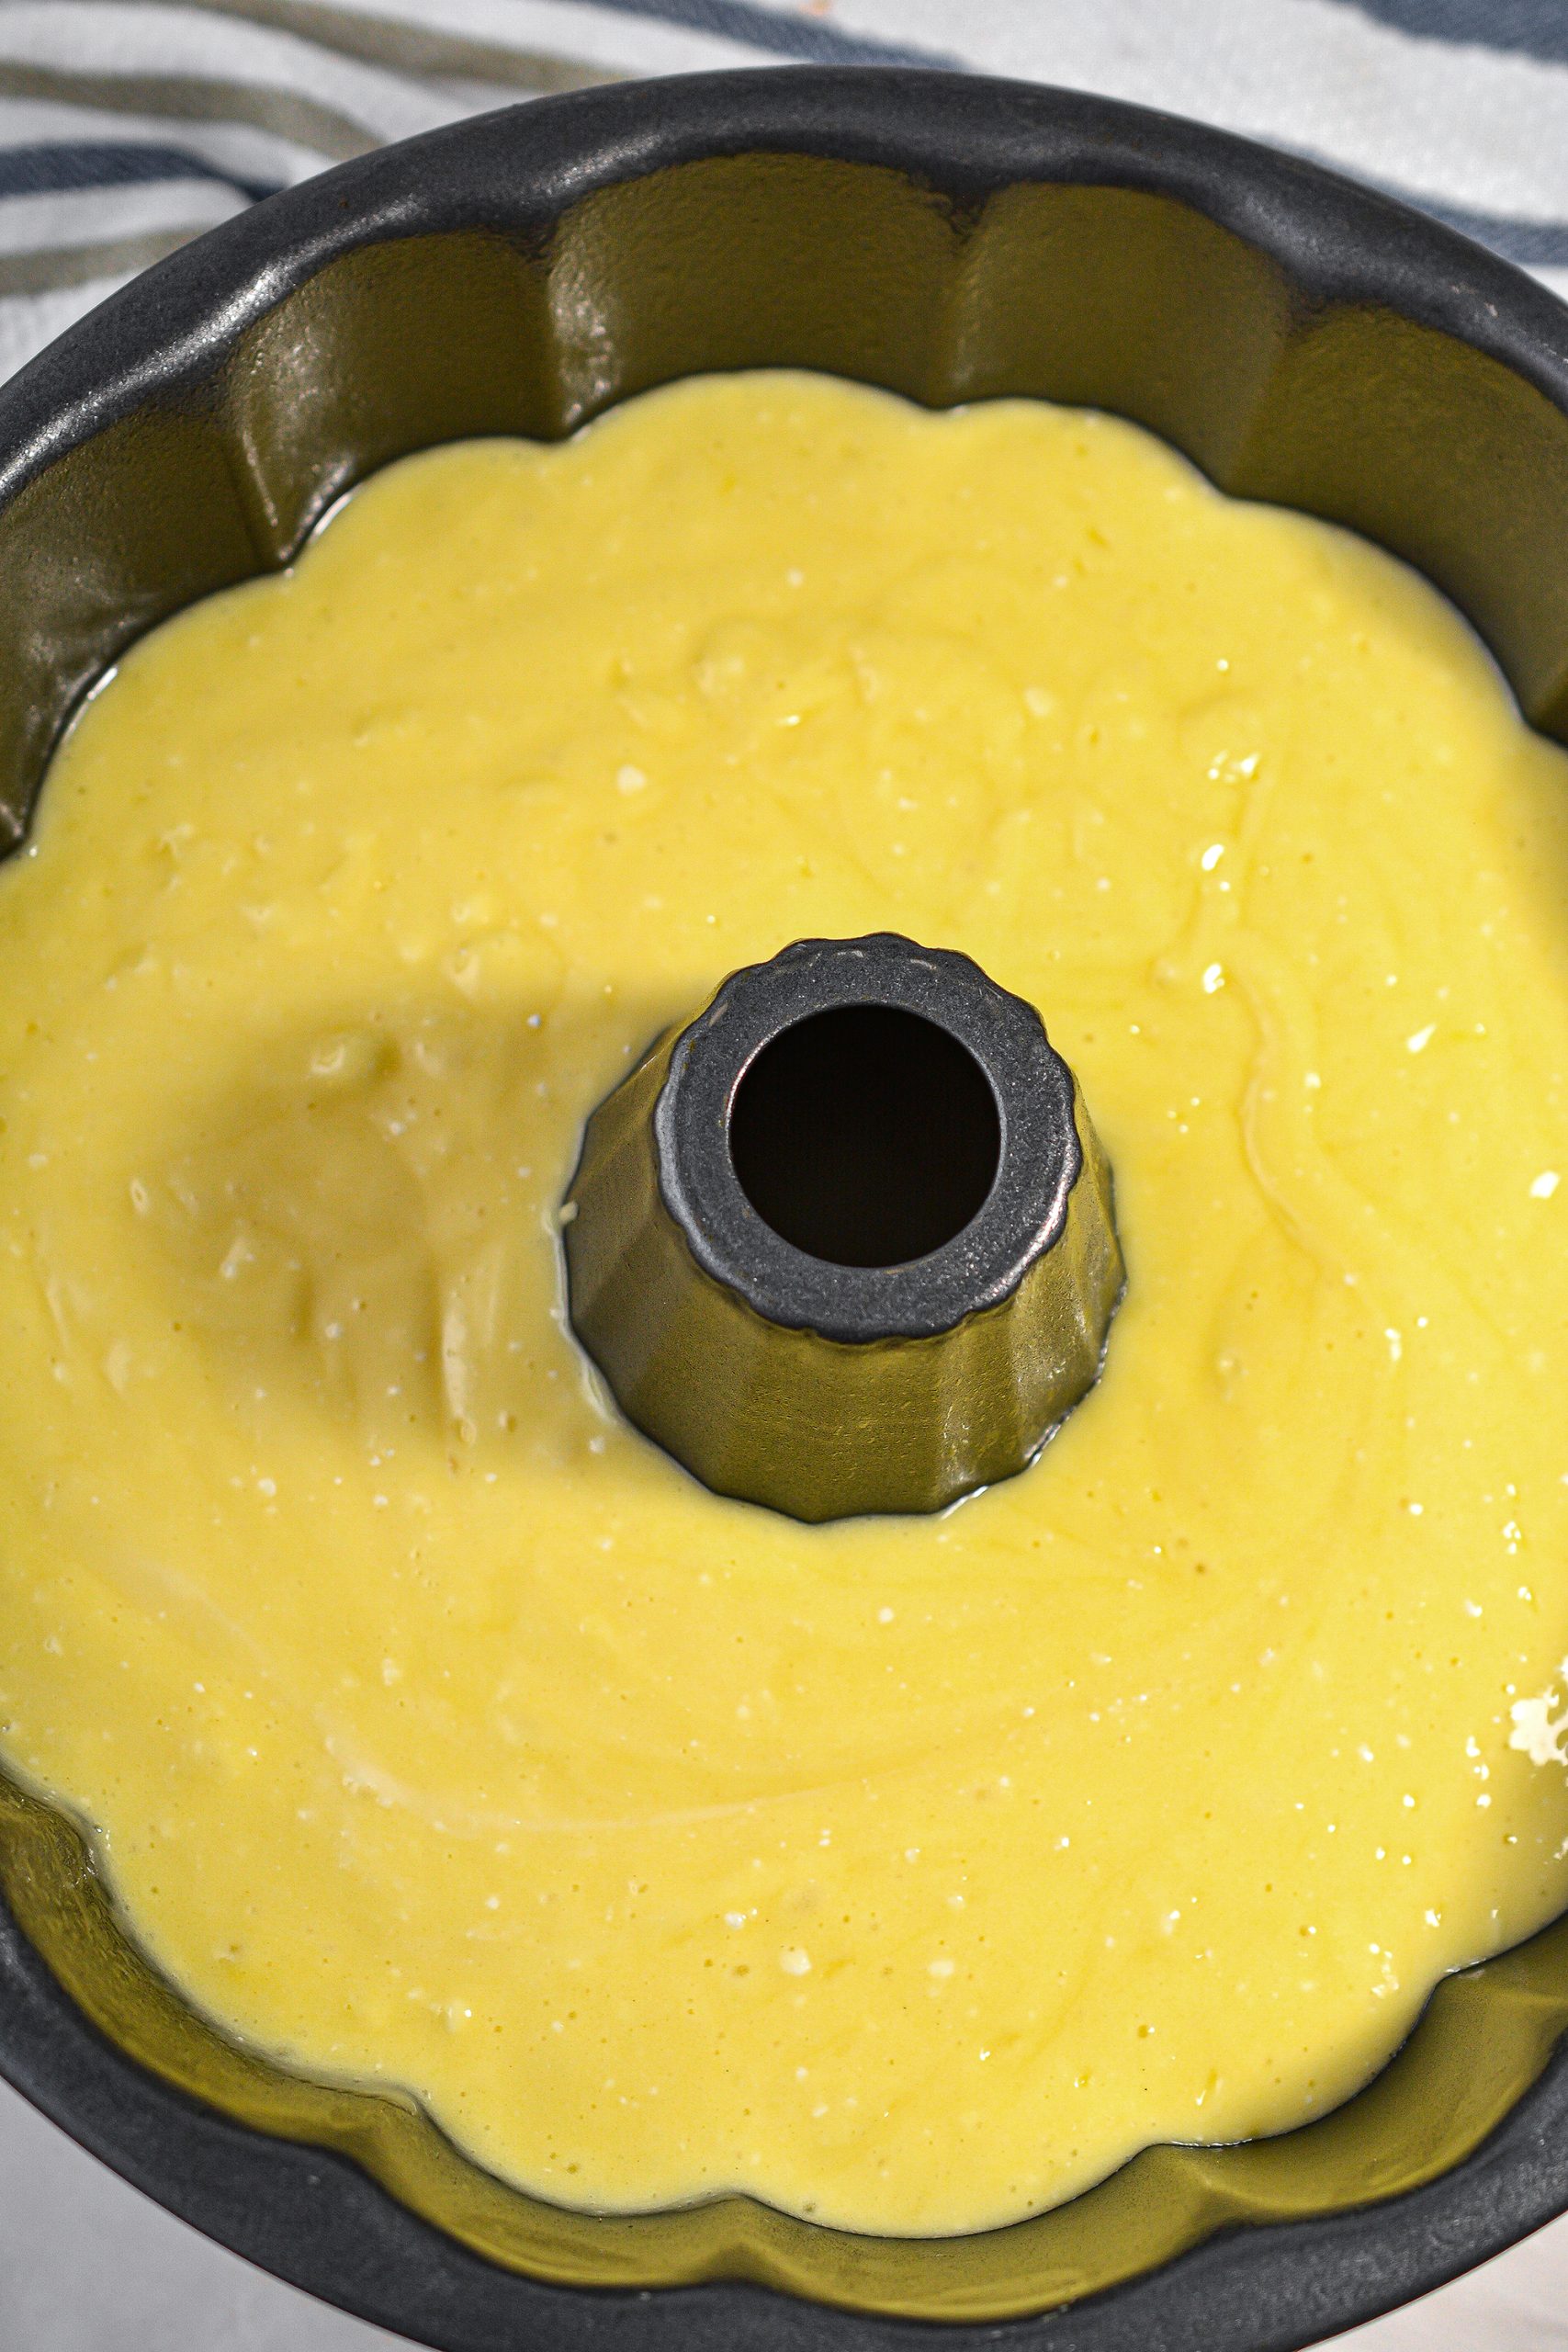 Pour the batter into a well-greased bundt pan.